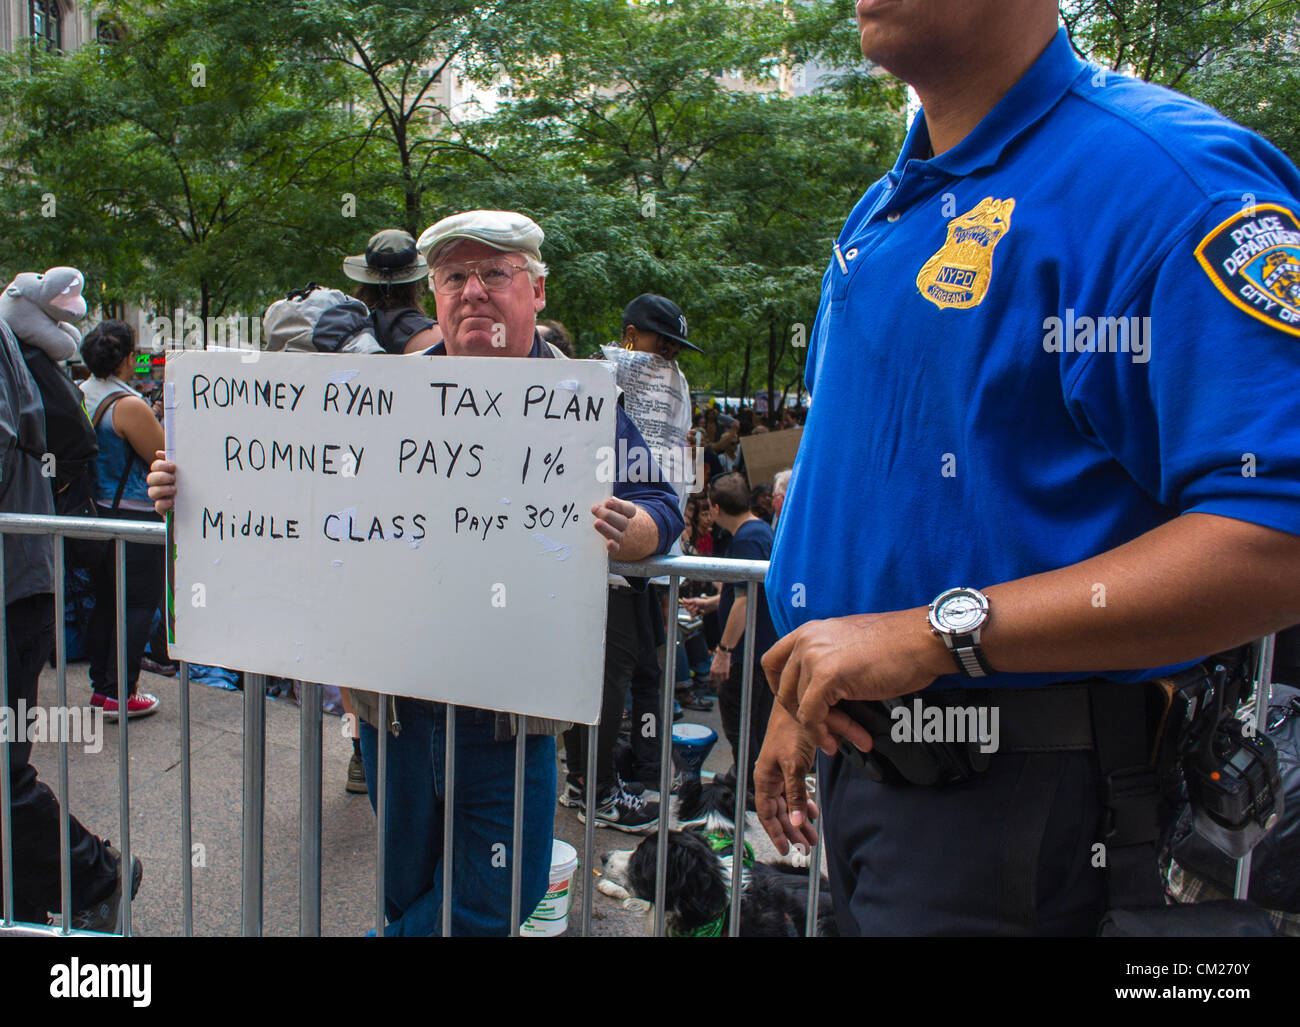 New York City, NY, USA, Protesters Holding Signs, Occupy Wall Street, near uniformed Policeman, social justice slogans Stock Photo